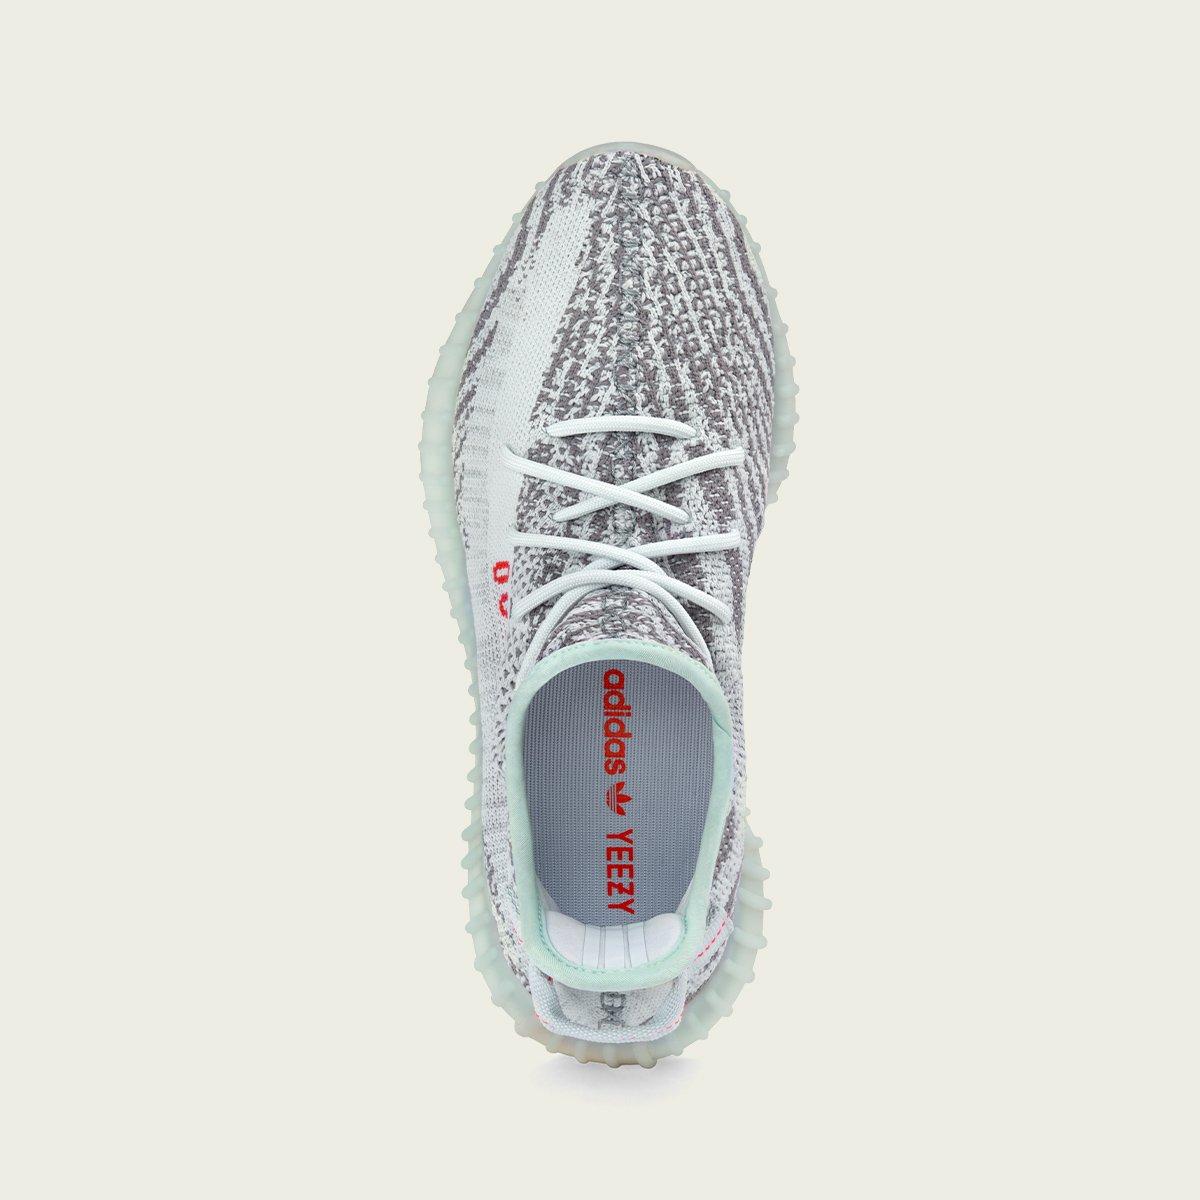 Sneakers Release – “Blue Tint” adidas x Yeezy Boost 350 V2 Launching 1/22